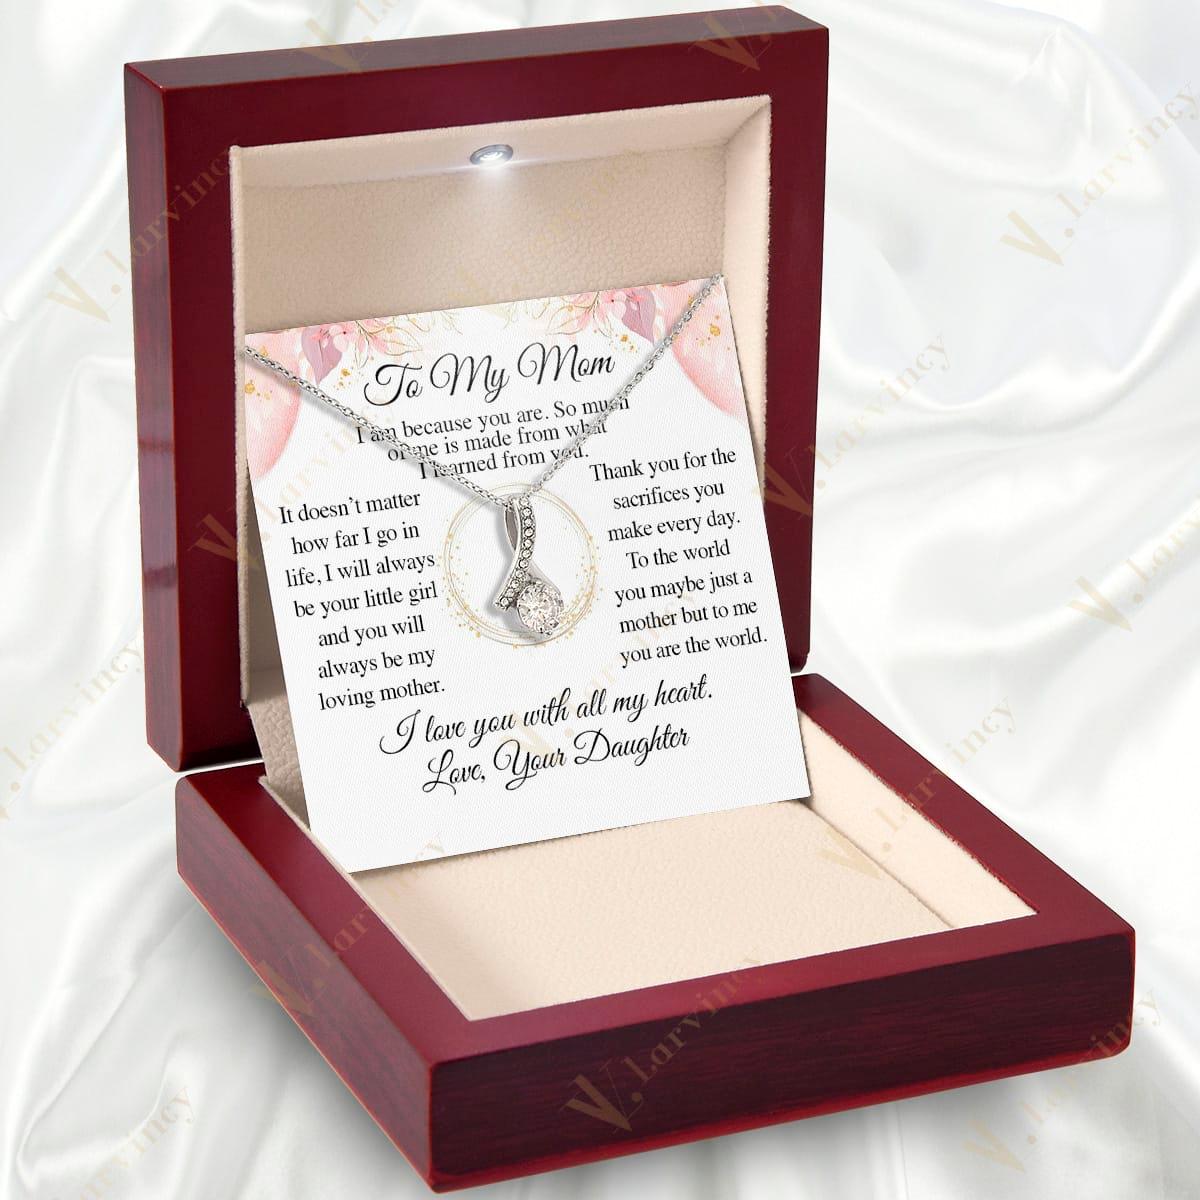 Mom Necklace Gifts From Daughter, Love Necklace For Mom, Jewelry For Mom Gifts From Daughter Necklace With Gift Box Personalized Message Card, Thank You Mom - Larvincy Jewel